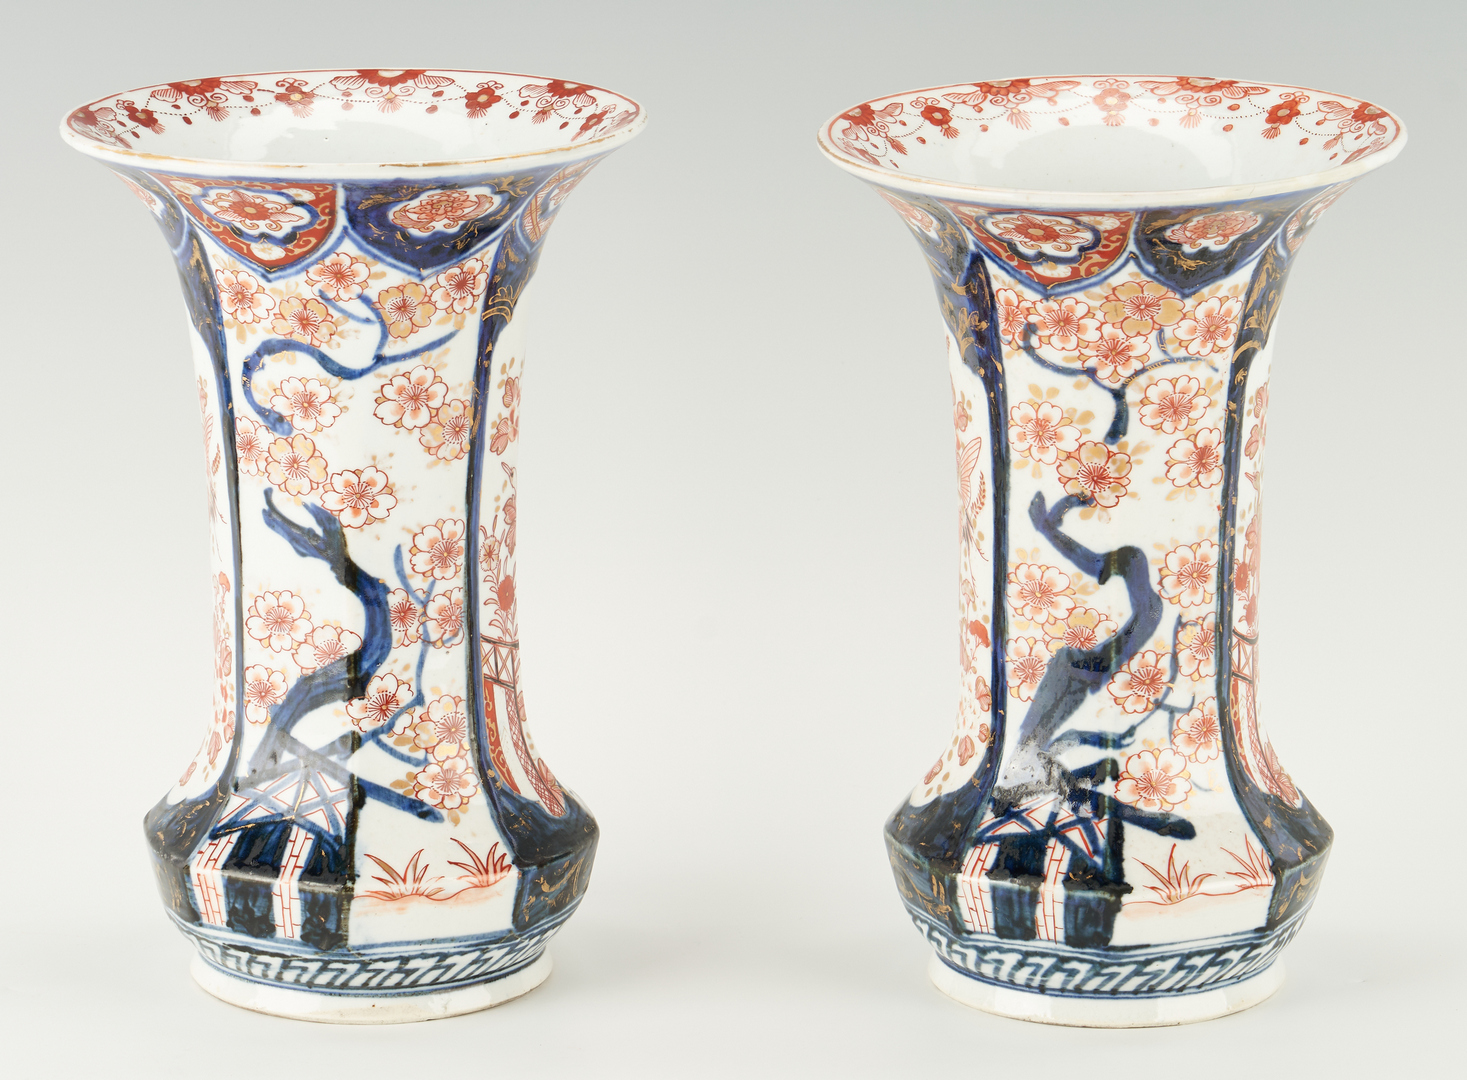 Lot 396: Pair of Imari Porcelain Vases, Boat and Square Dishes